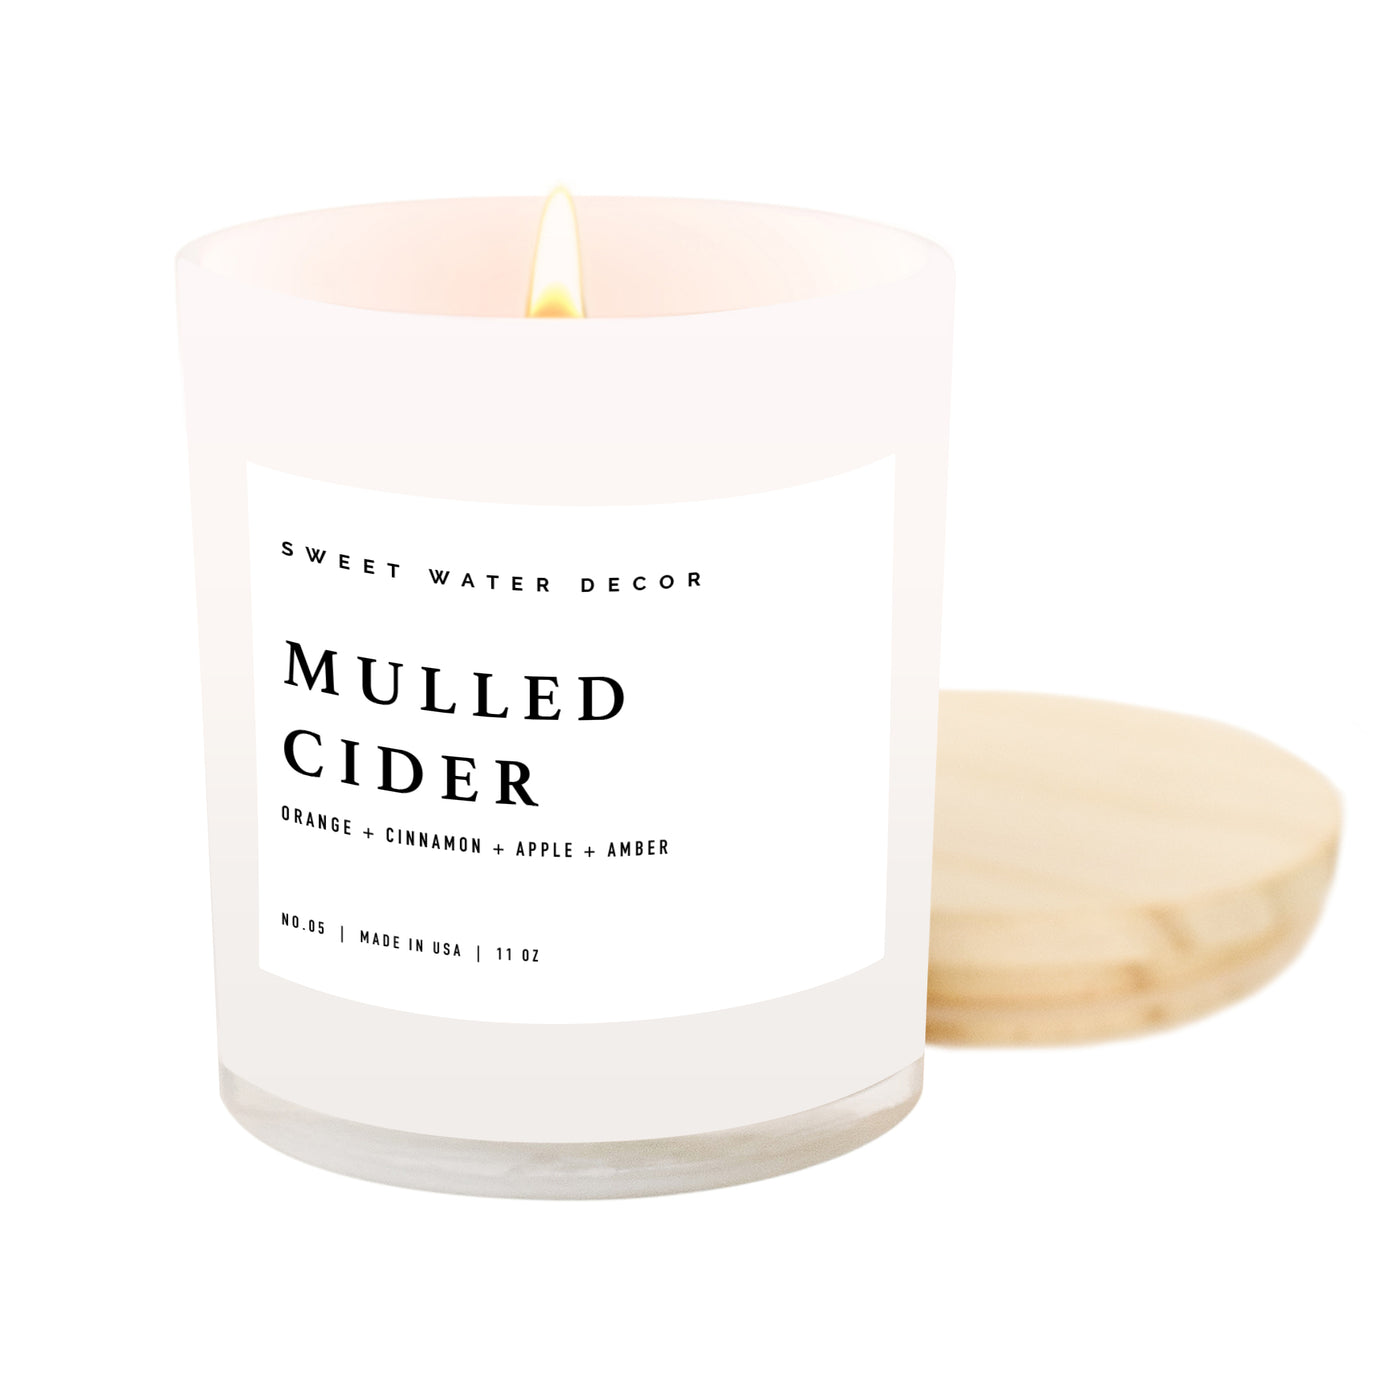 Mulled Cider Soy Candle - White Jar - 11 oz - Sweet Water Decor - Candles